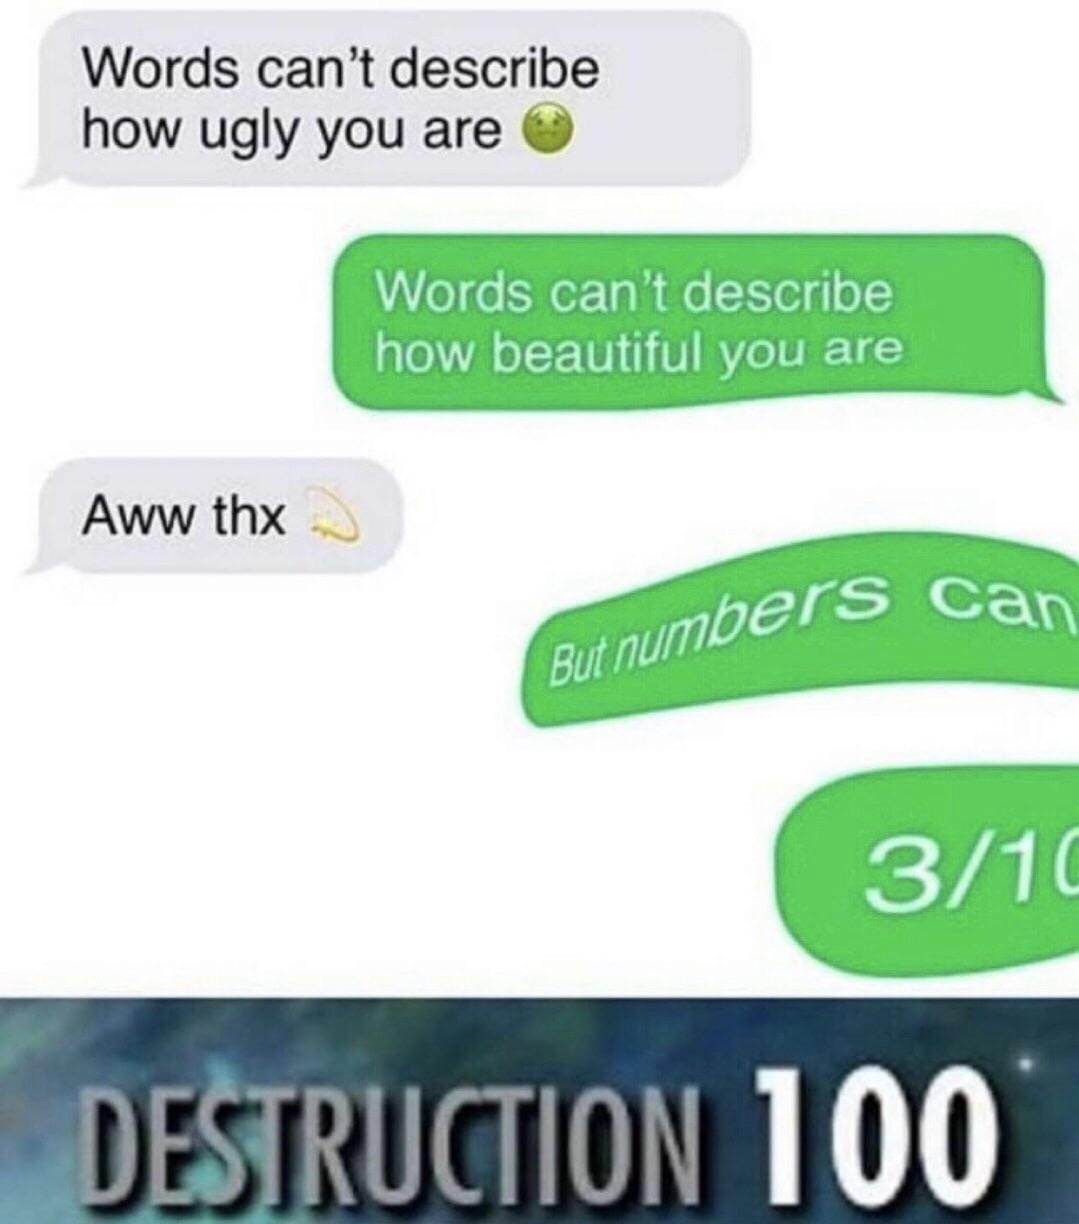 cute other-memes cute text: Words can't describe how ugly you are Words can't describe how beautiful you are Aww thx Butnumbers can DßJRUCTlON 100 